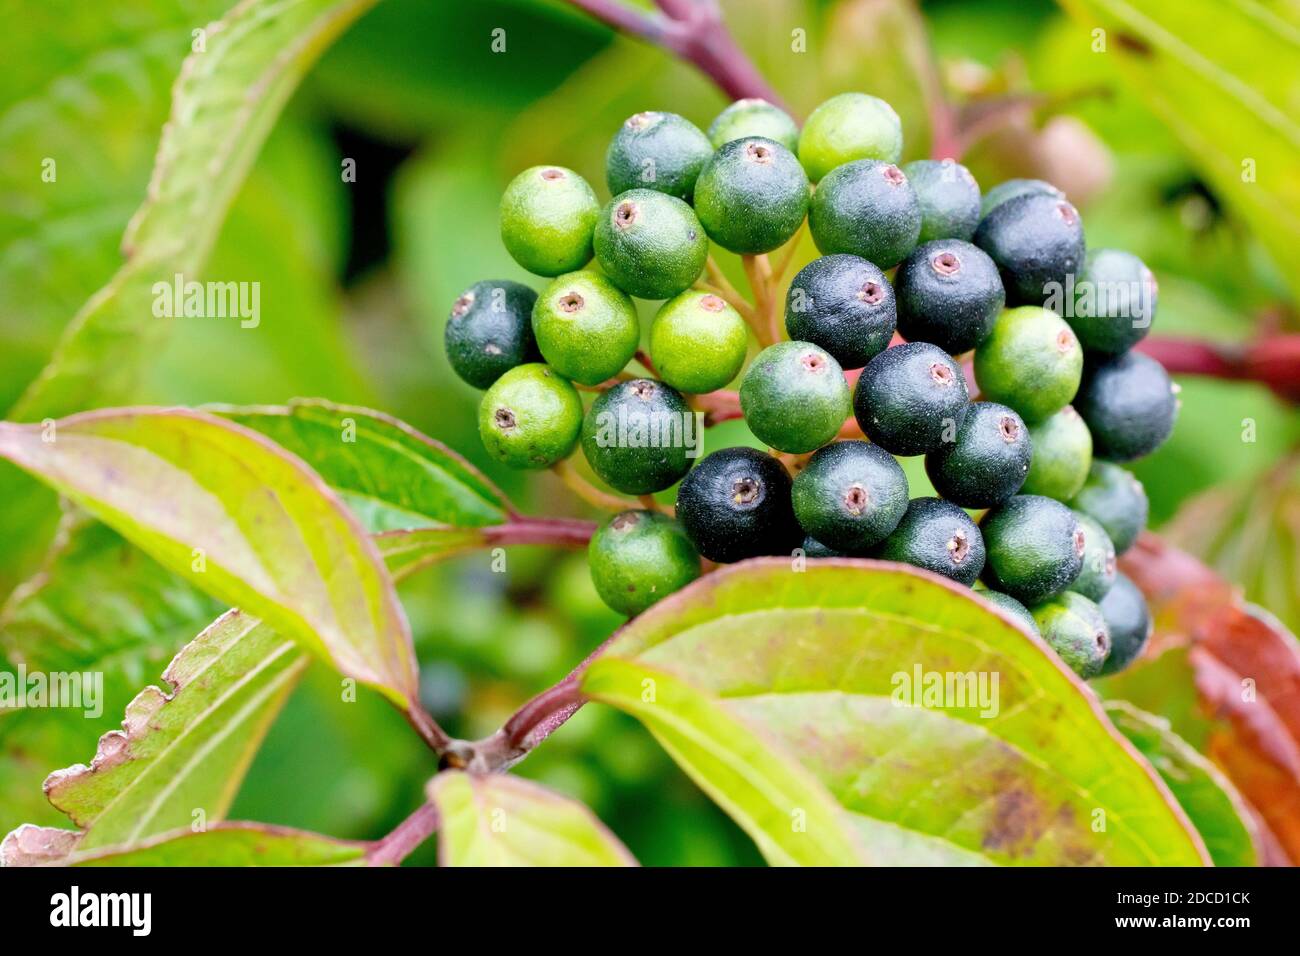 Dogwood (cornus sanguinea), close up of the fruit or berries of the plant as they begin to ripen from green to black. Stock Photo